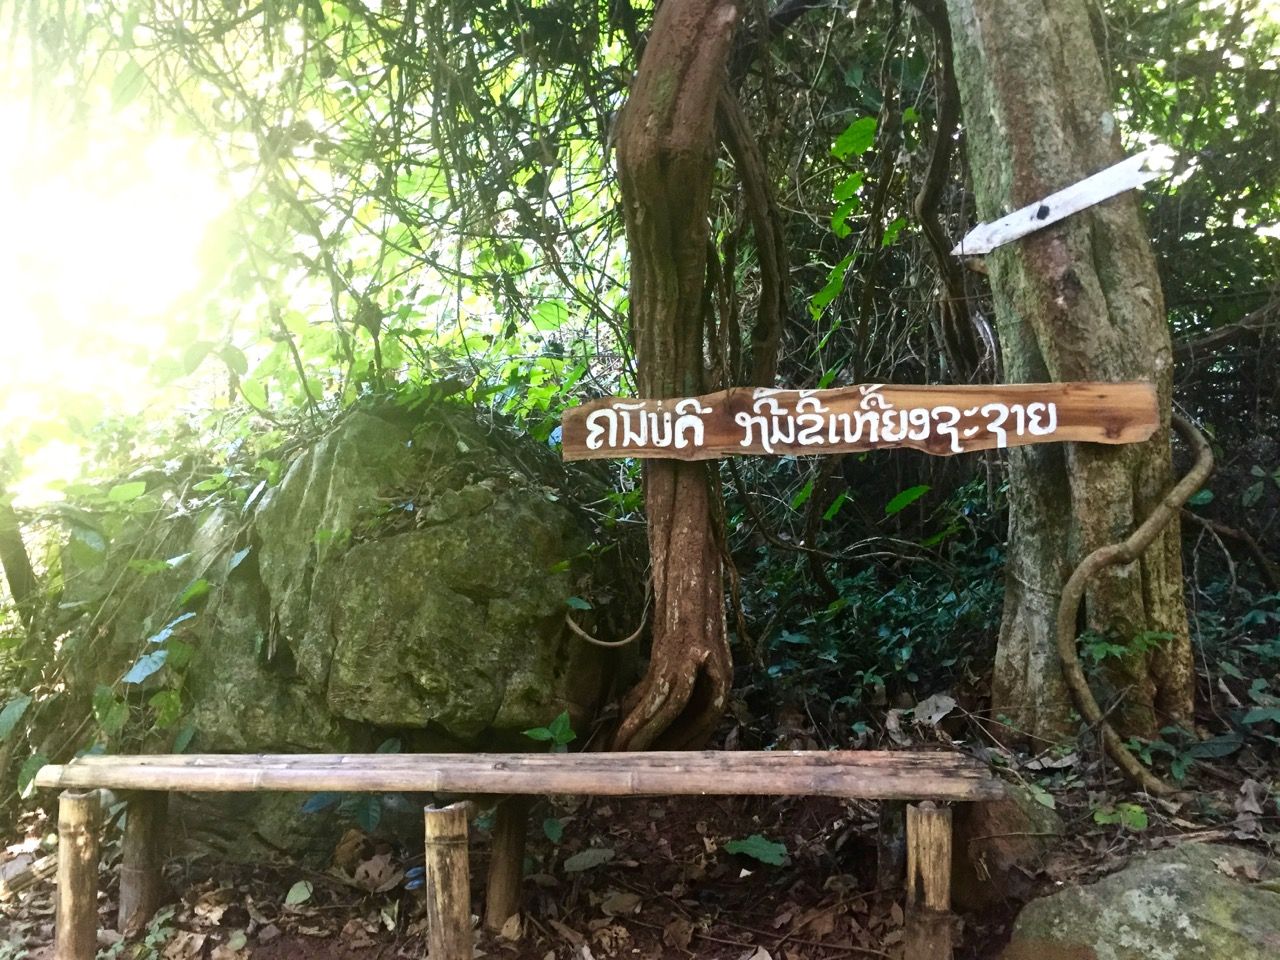 Benches with signs in only Lao.